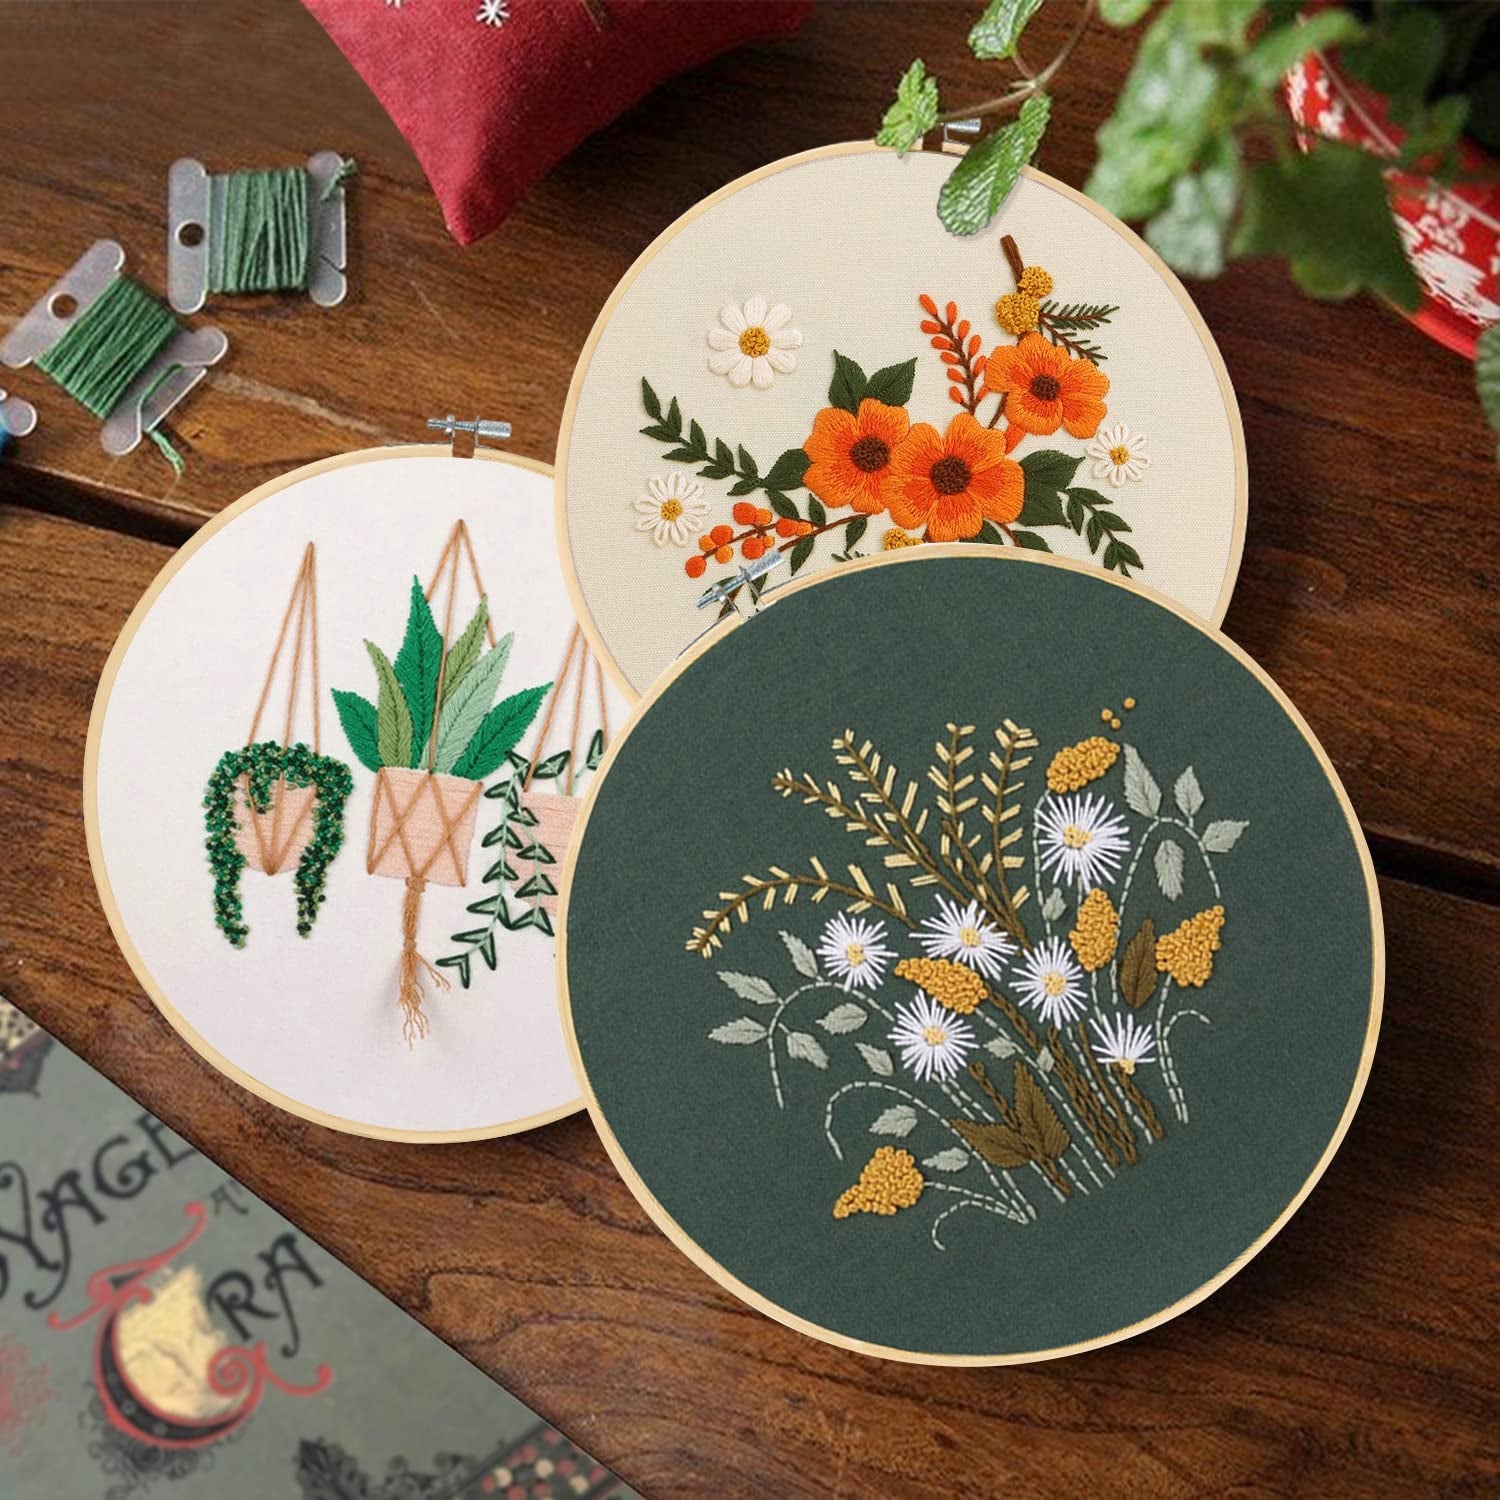 three embroidery hoops, one with orange flowers, one with wild flowers, and one with houseplants